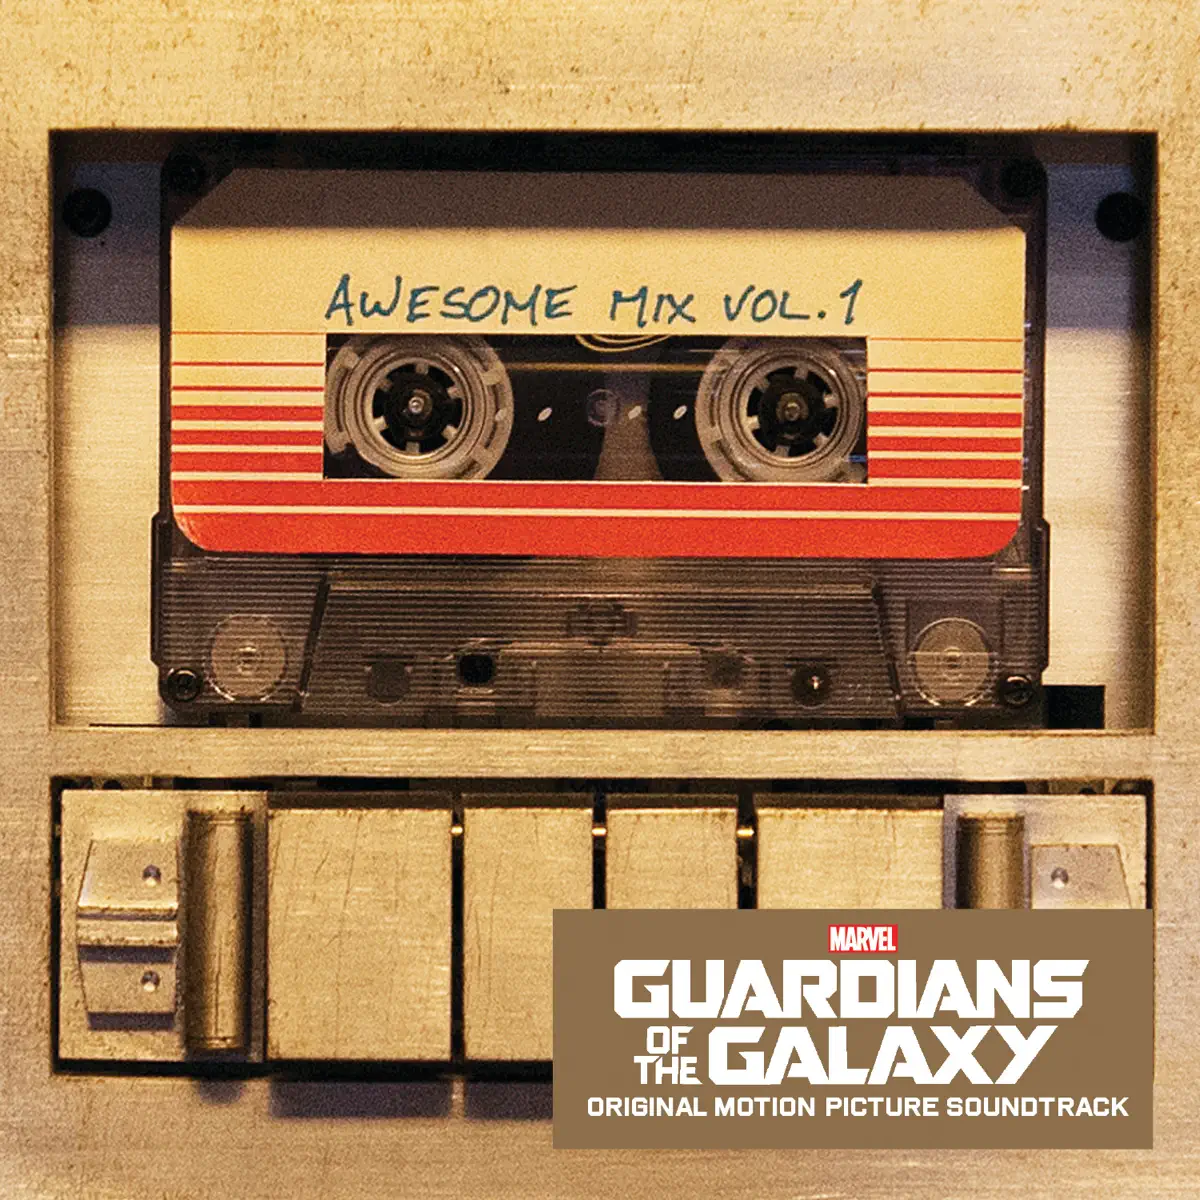 Various Artists - 银河护卫队 Guardians of the Galaxy Awesome Mix, Vol. 1 (Original Motion Picture Soundtrack) (2014) [iTunes Plus AAC M4A]-新房子